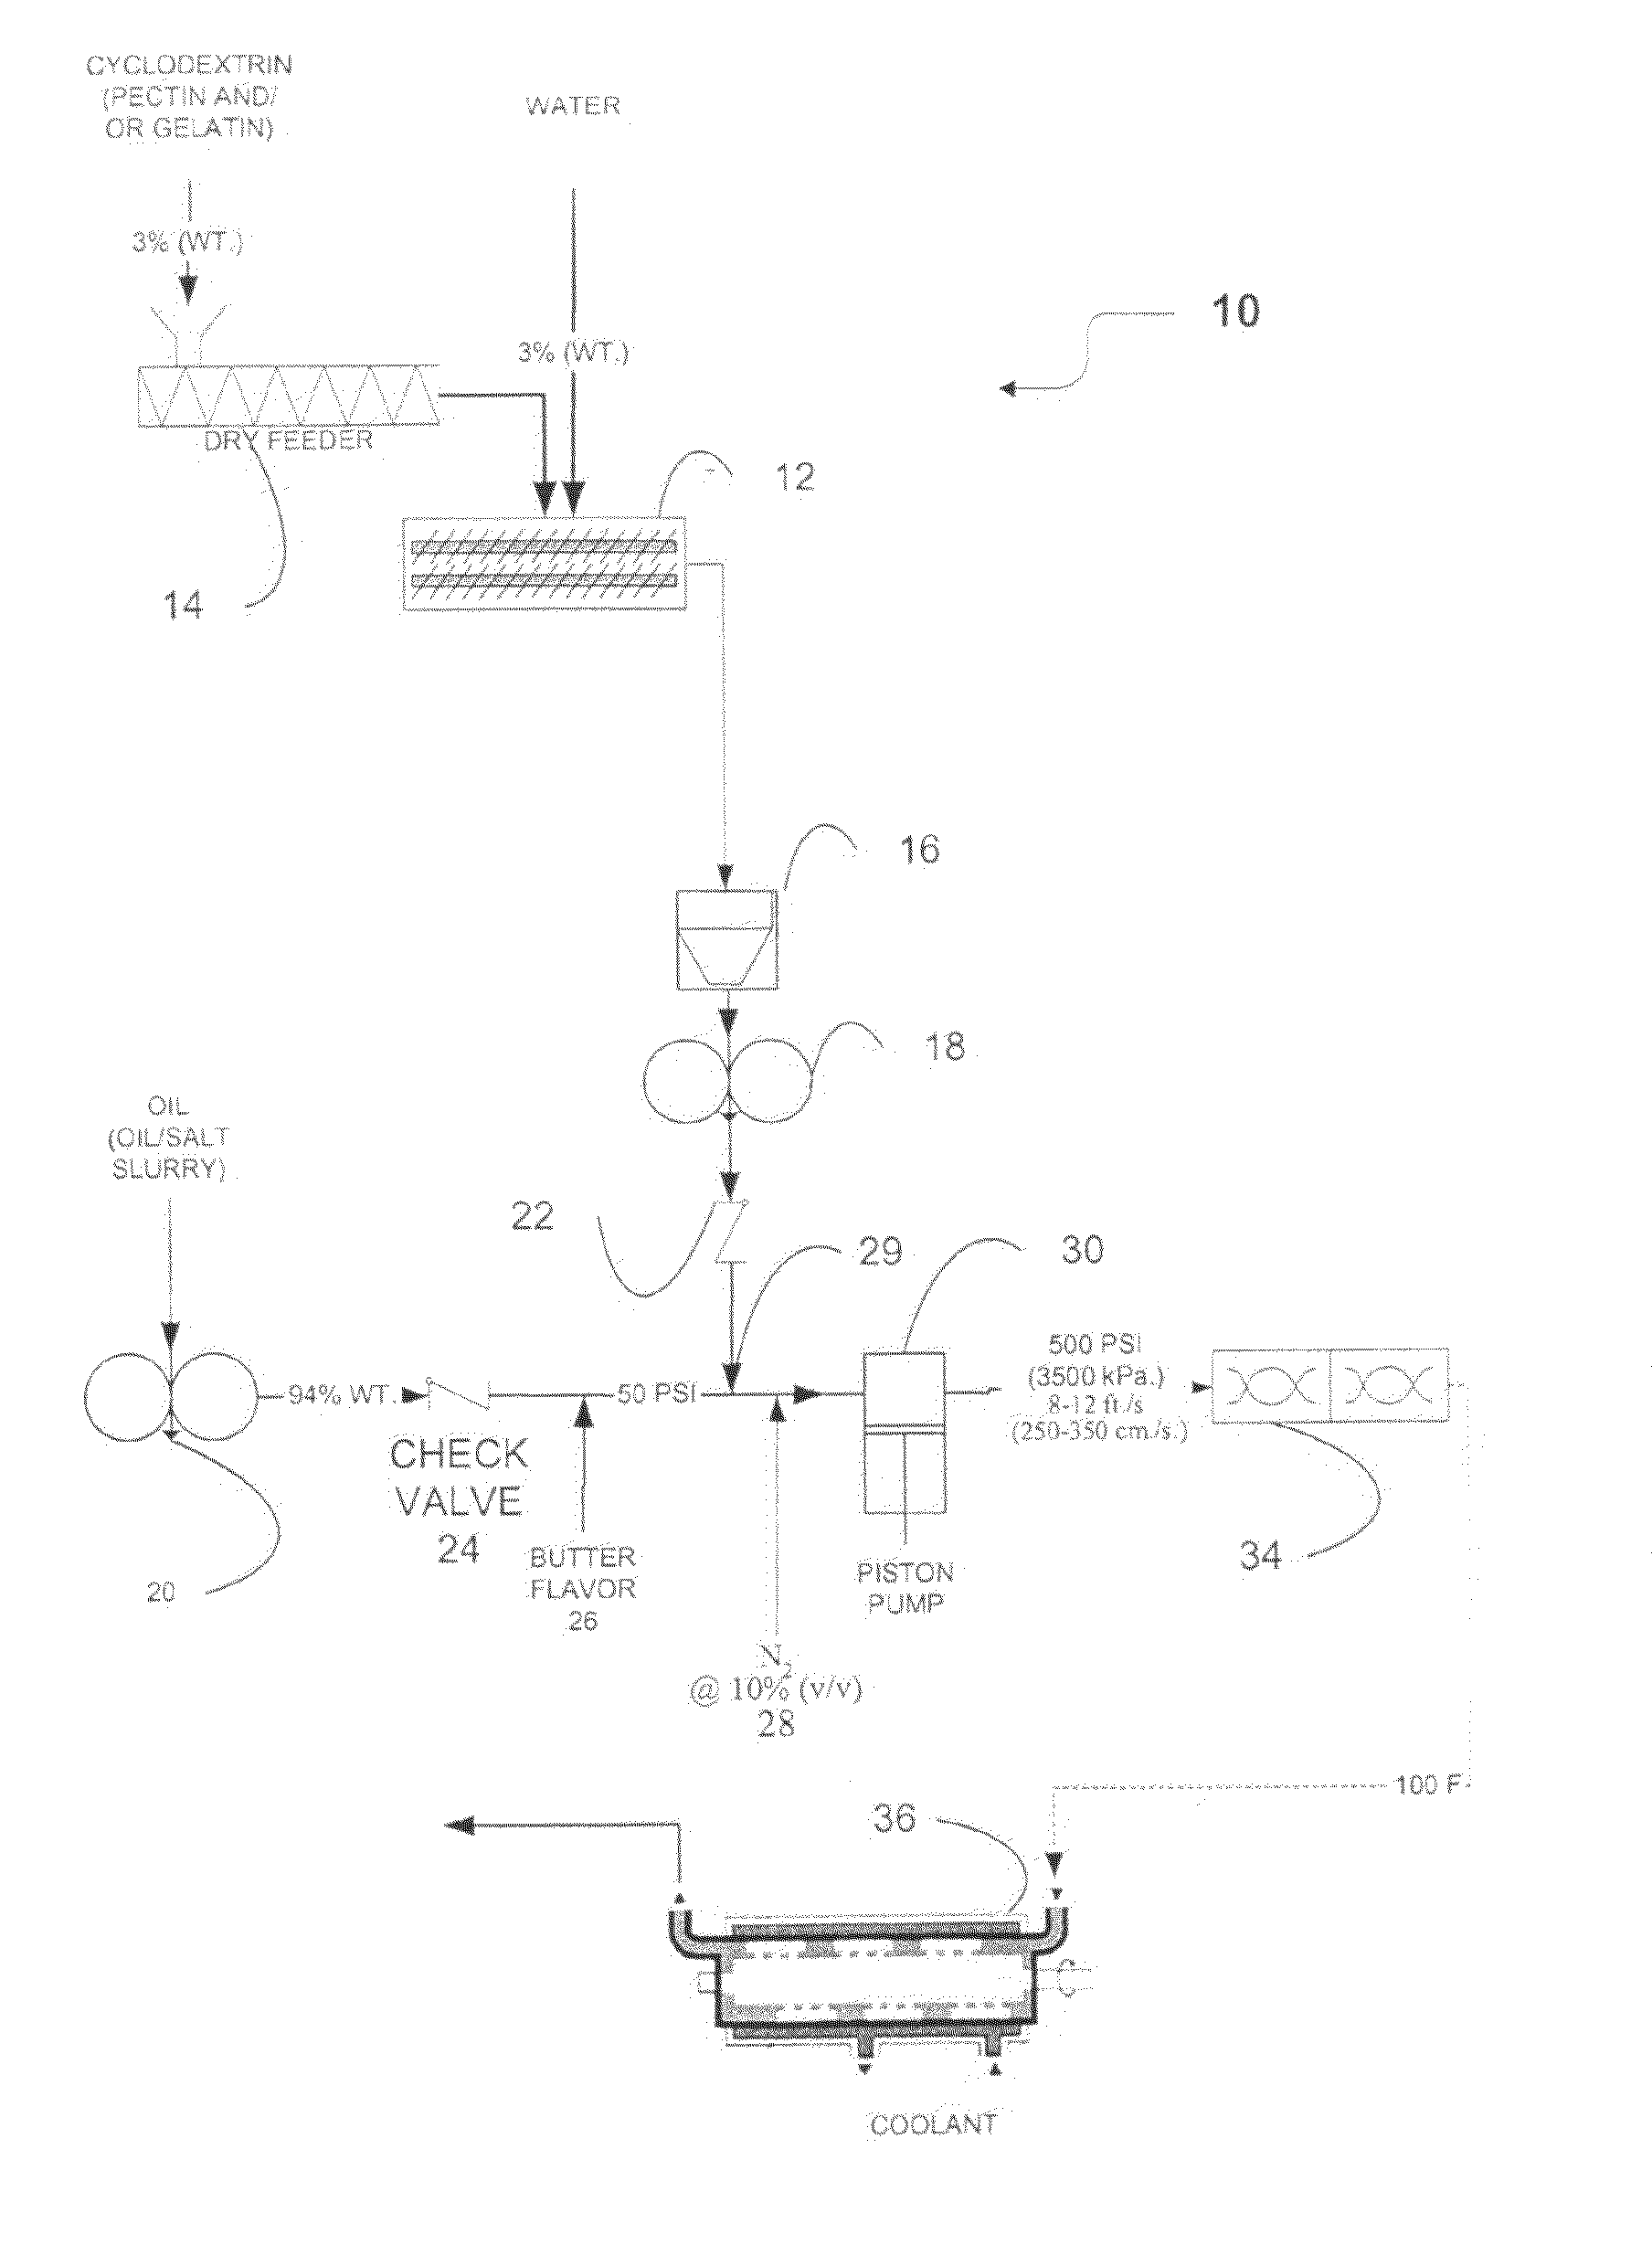 Method of making complexed fat compositions